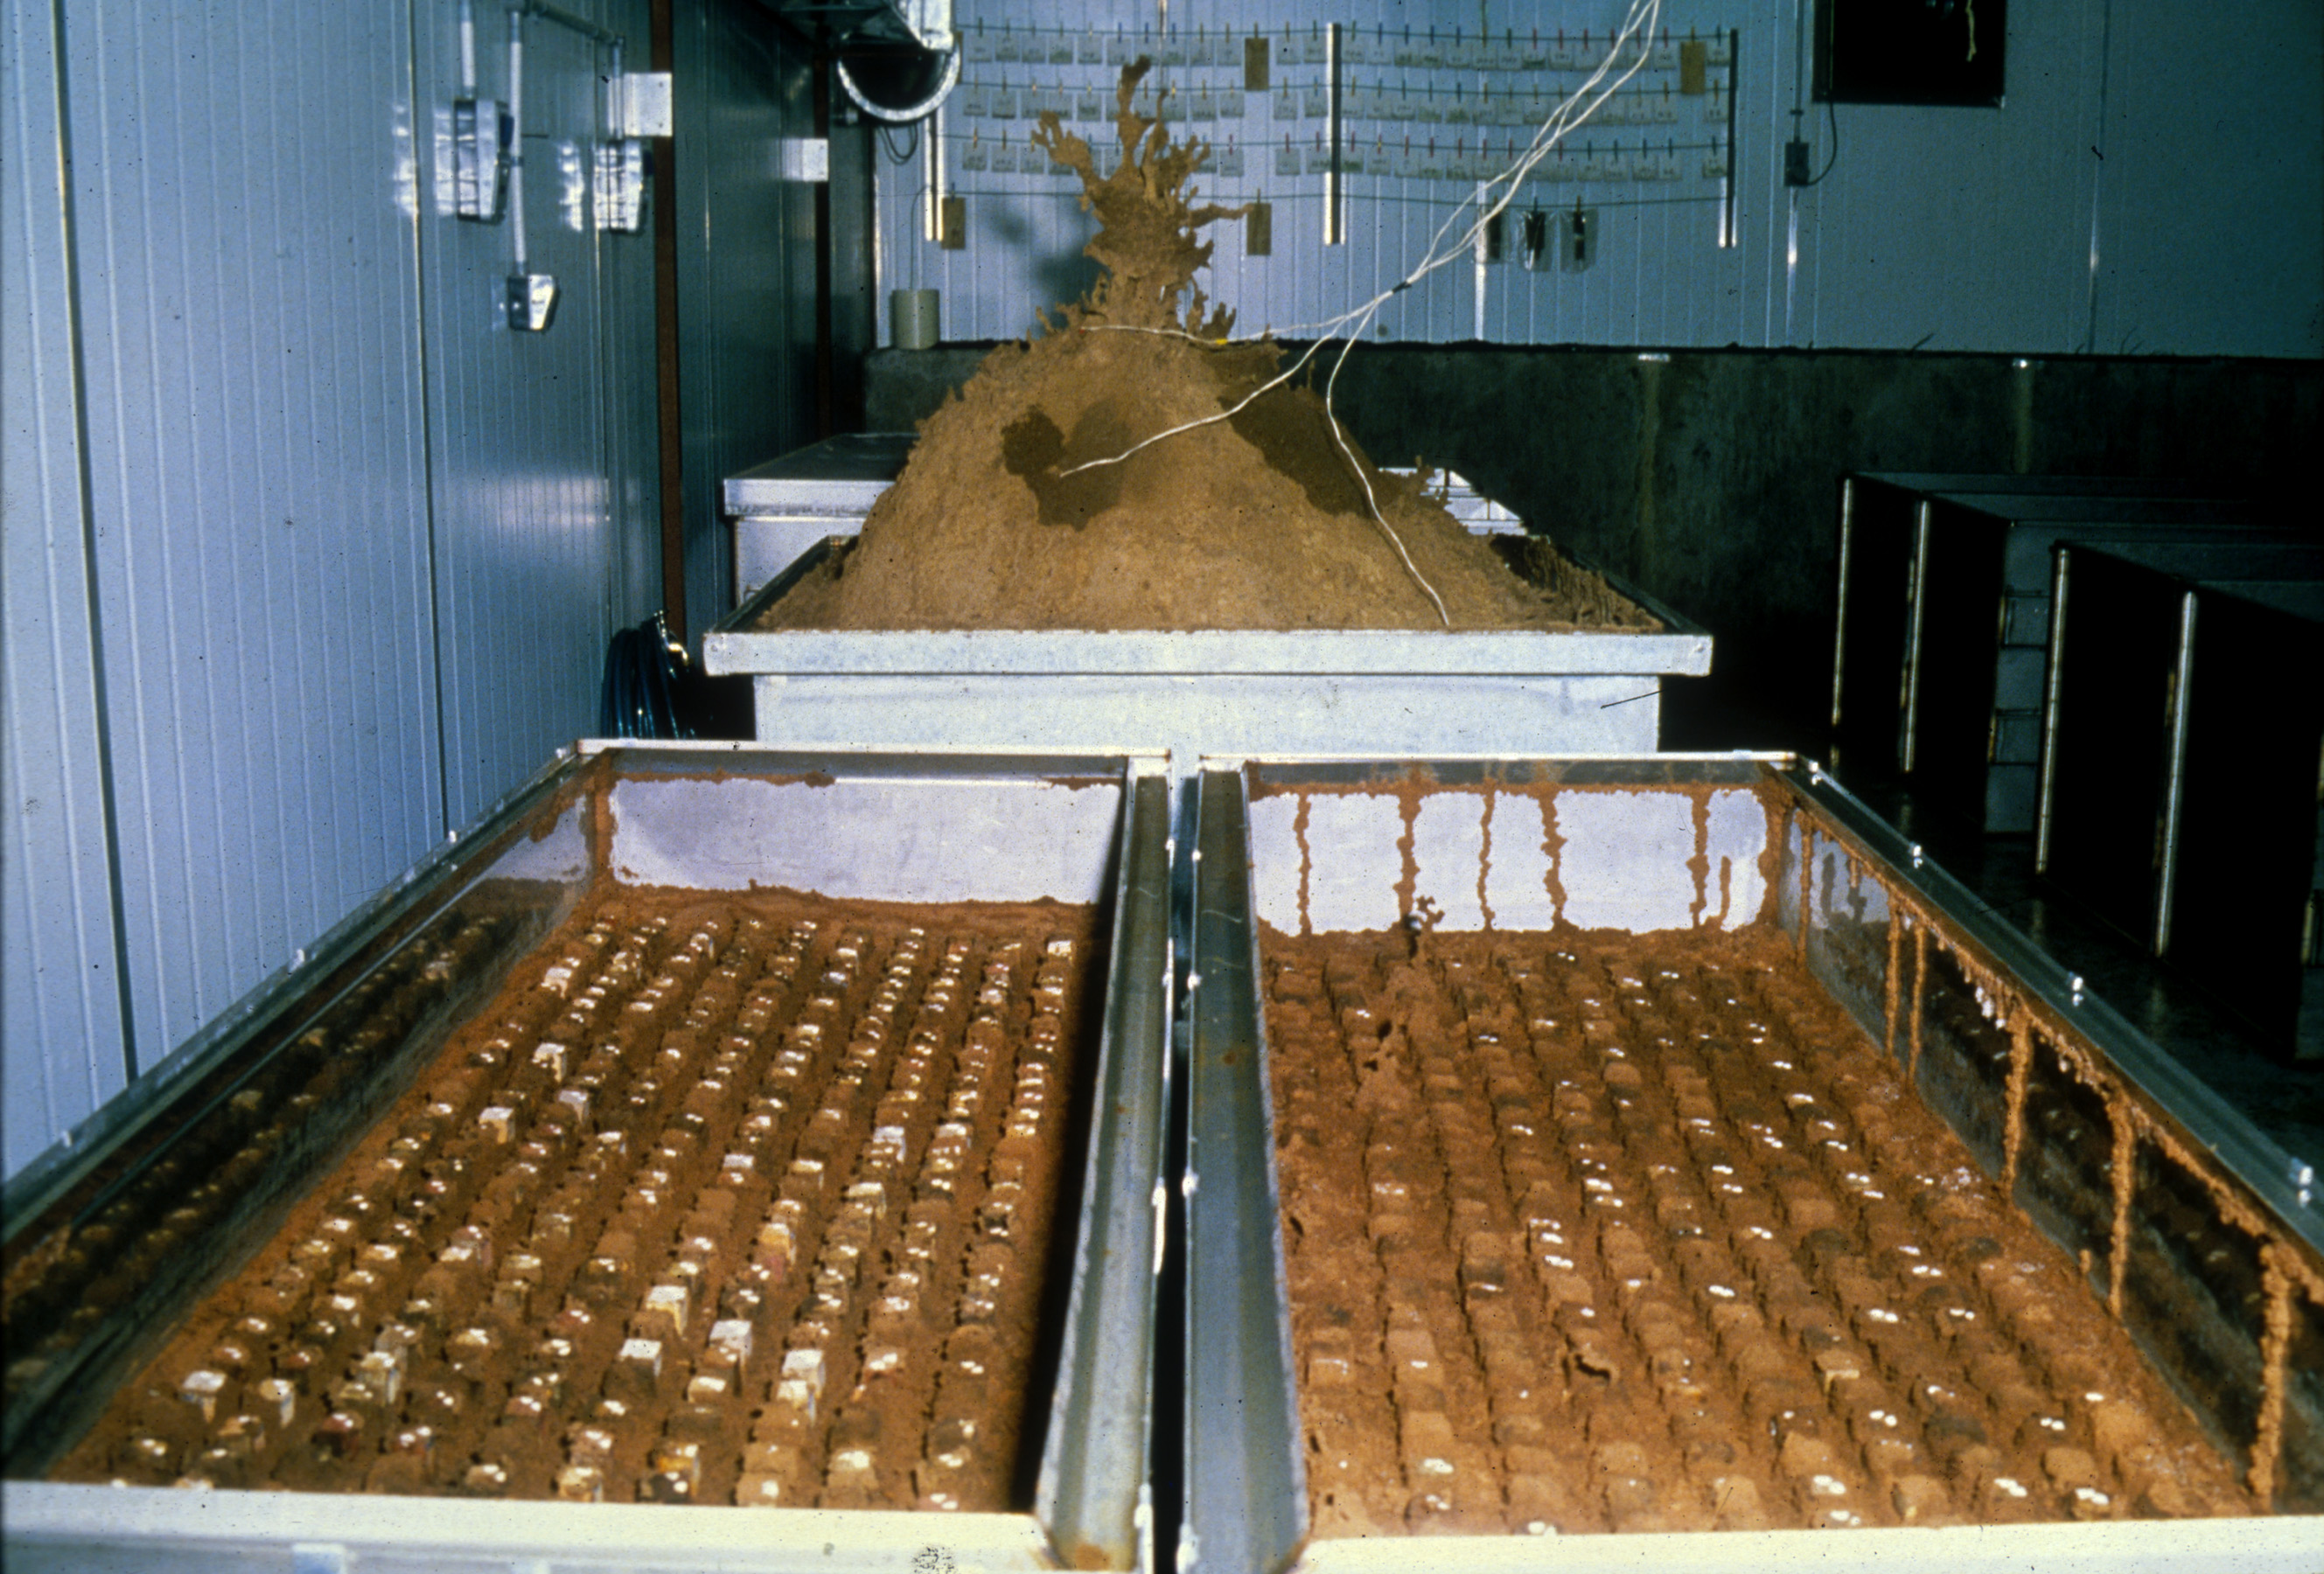 Termite research at The Commonwealth Scientific and Industrial Research Organisation (CSIRO), Australia. Date and Photographer unknown.